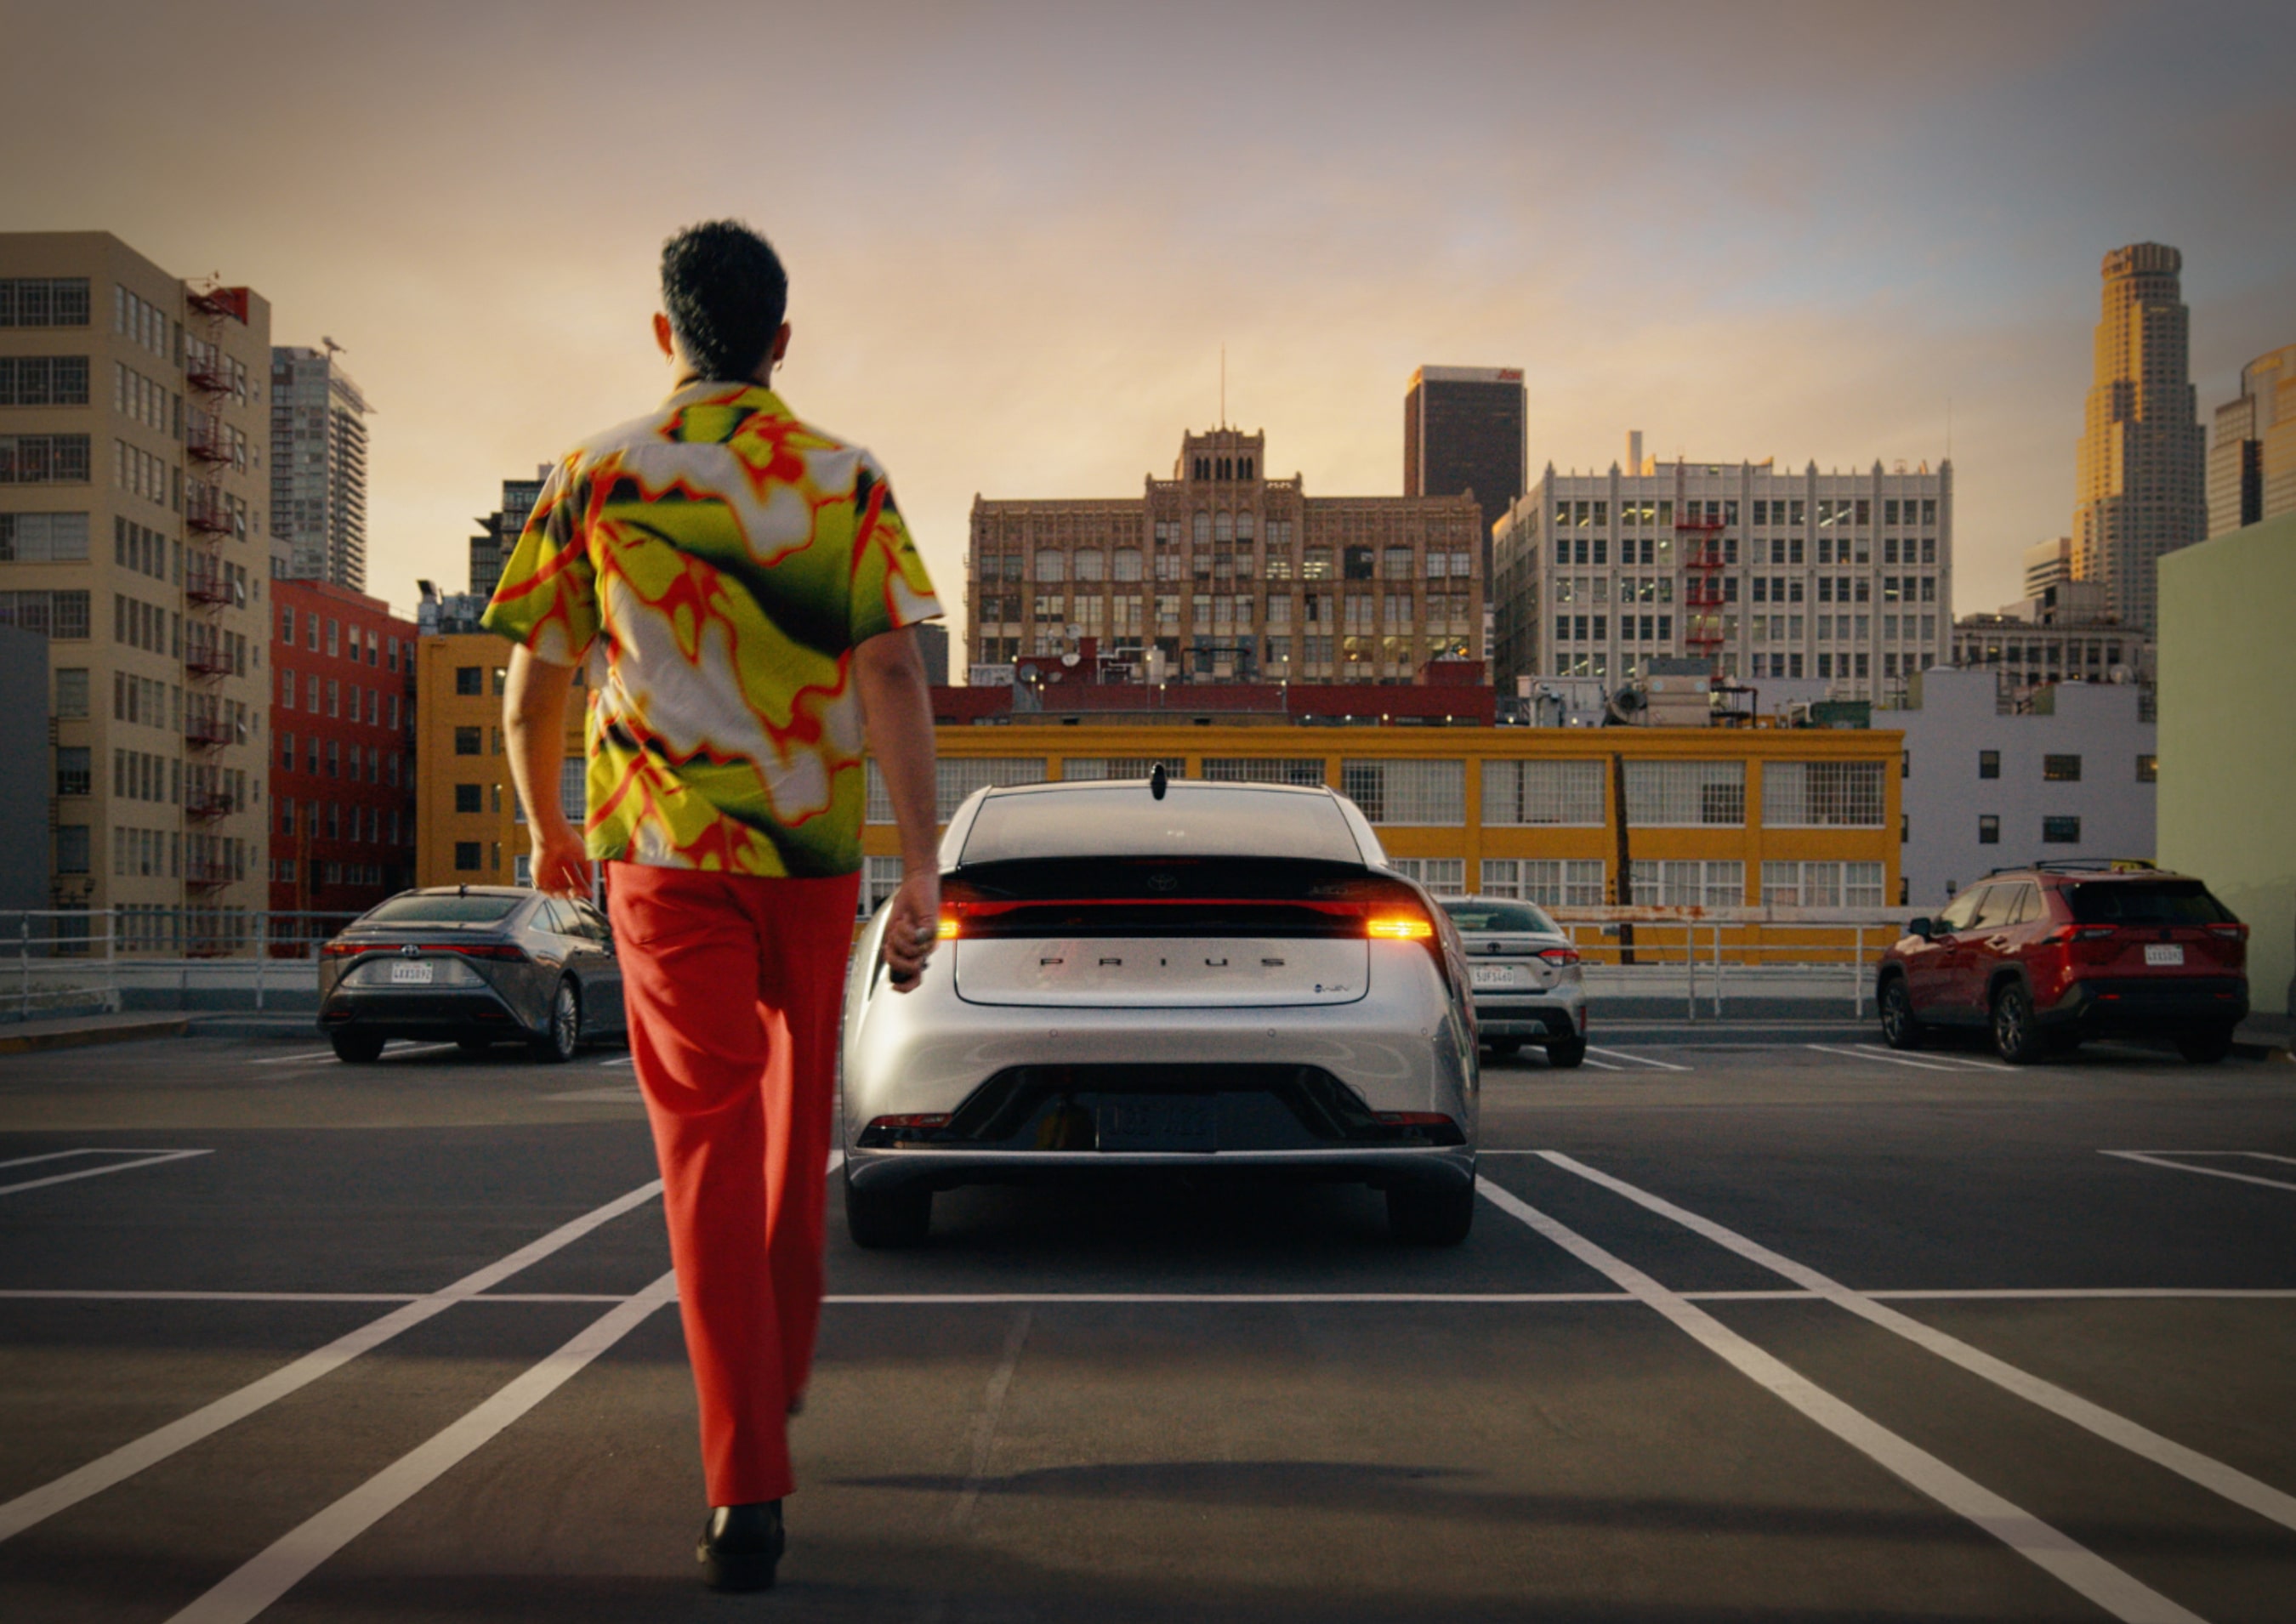 Developed by InterTrend Communications, Toyota’s new spot “Exhilarating” shows off the all-new 2023 Prius.